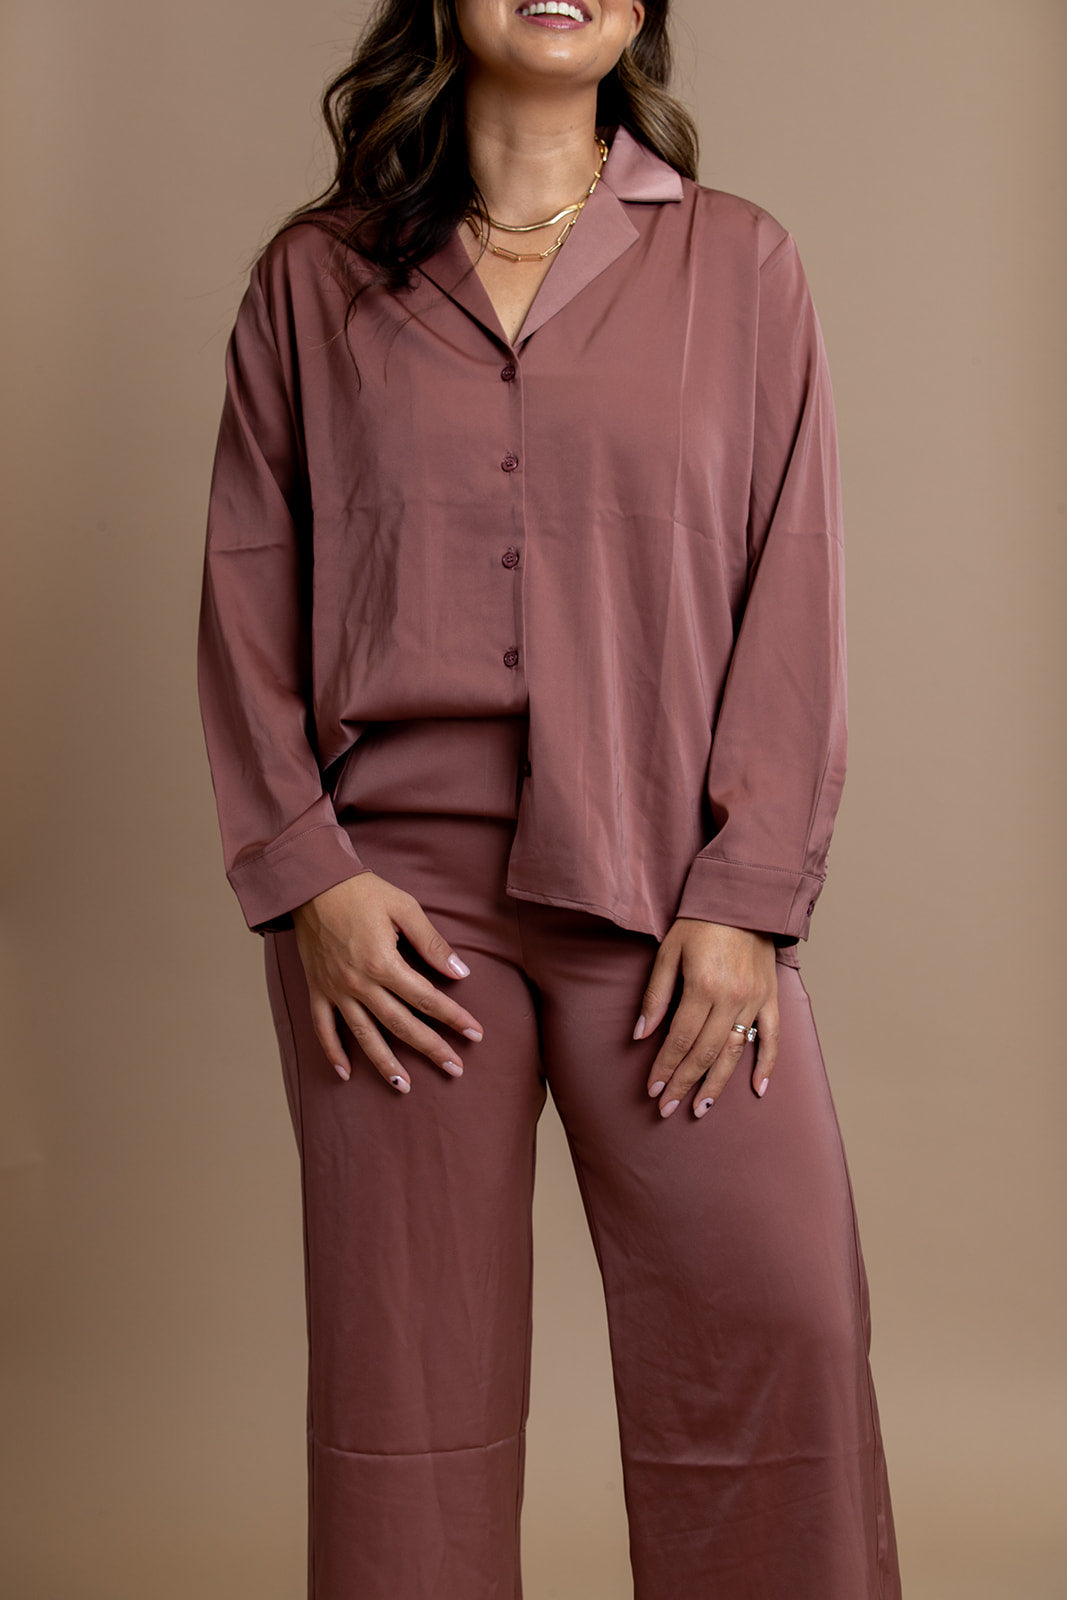 Golden Hour Shirt and Pants Set in Mauve